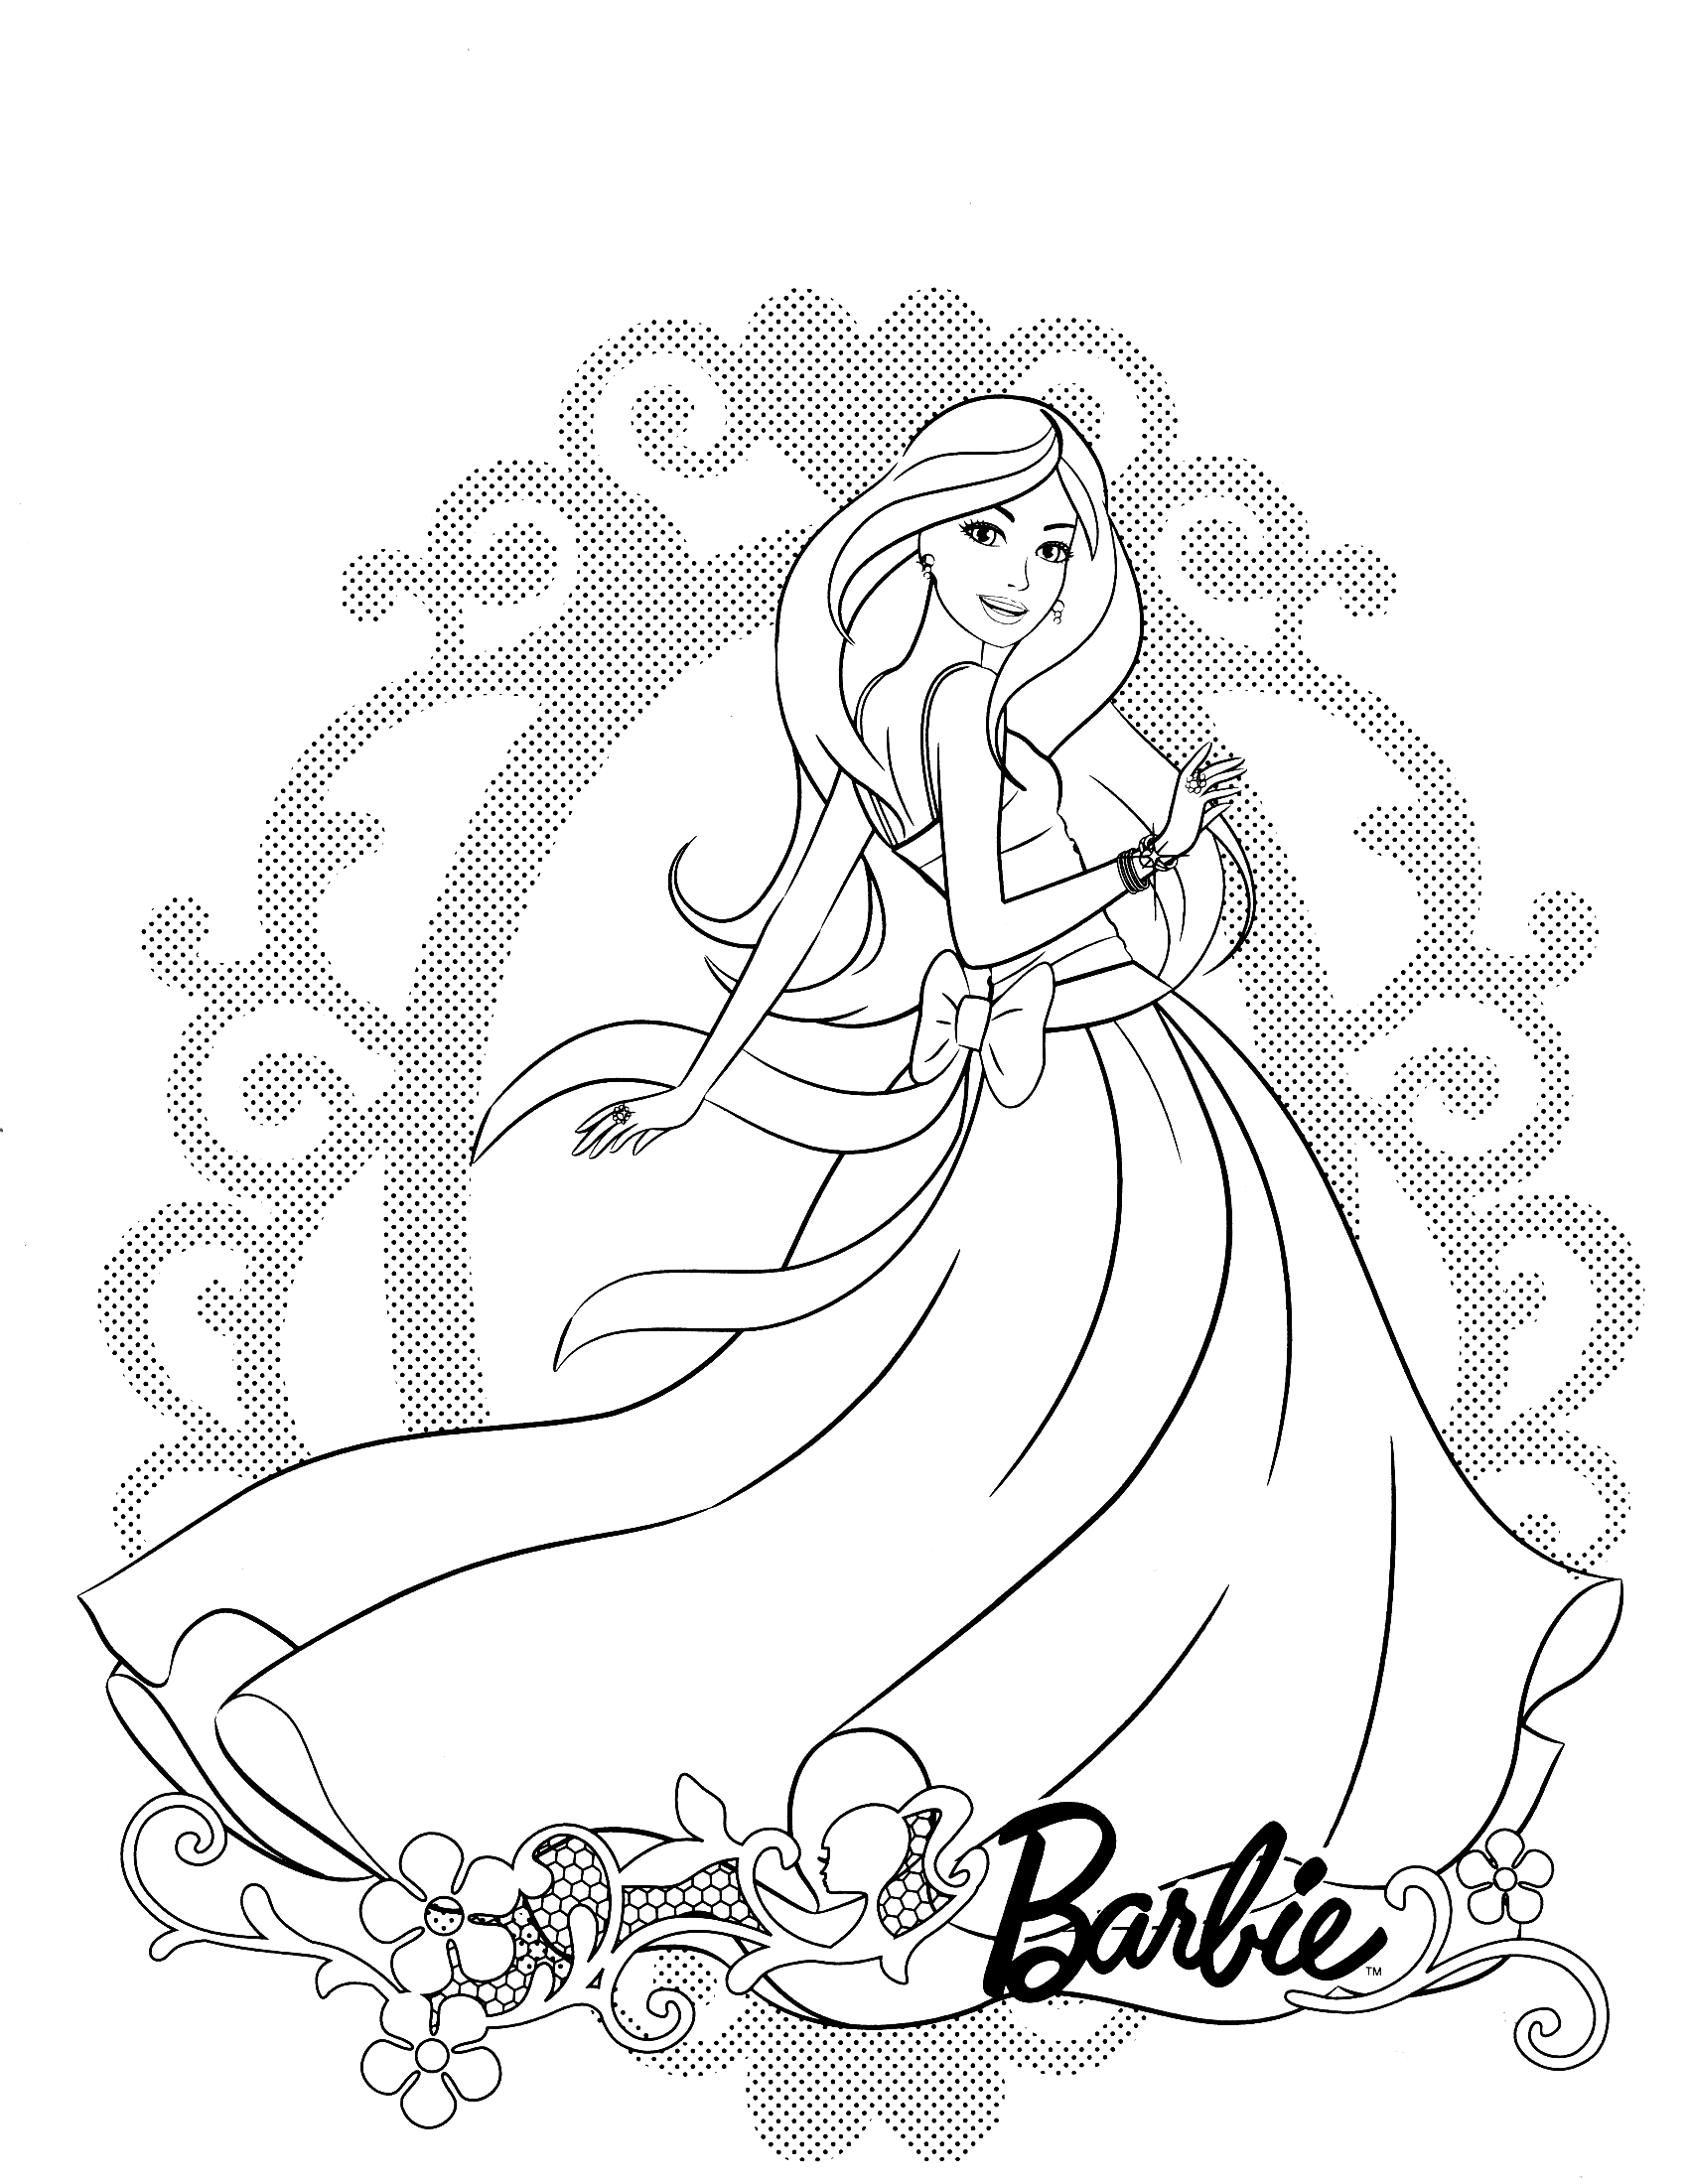 Free download Barbie Dream House Coloring Pages Coloring pages ...